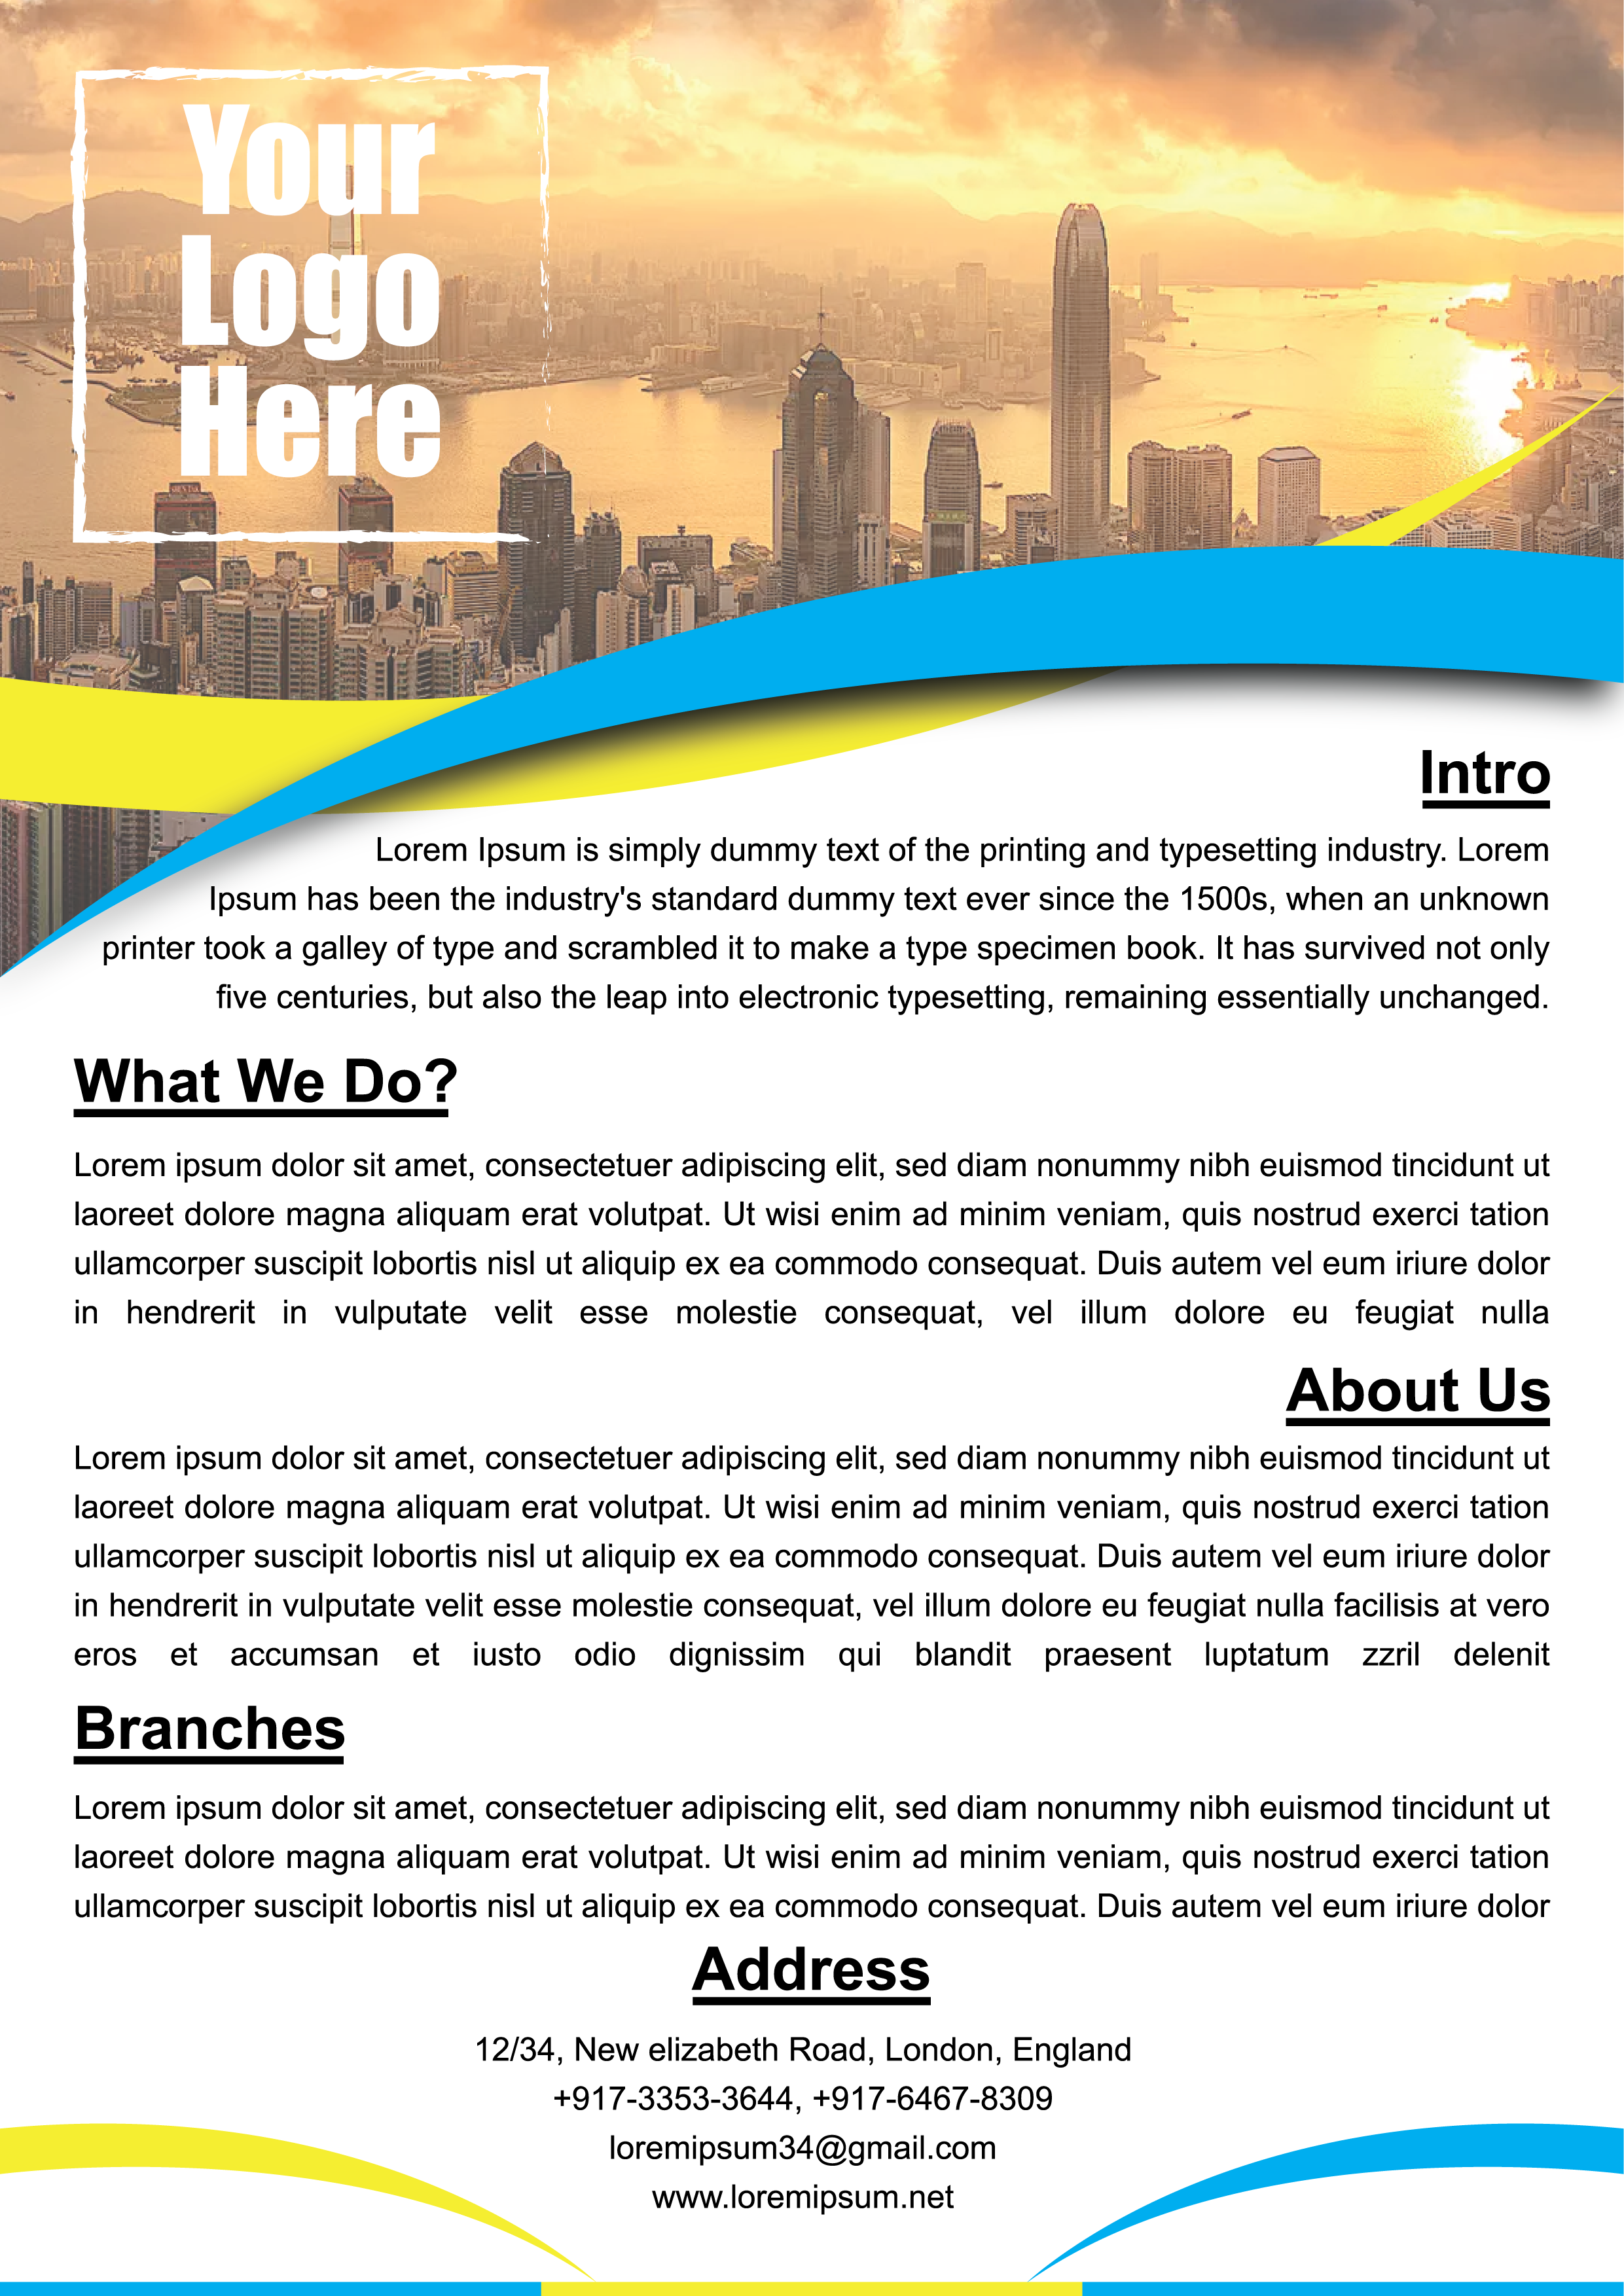 6138I will design the best promotional flyer for your business